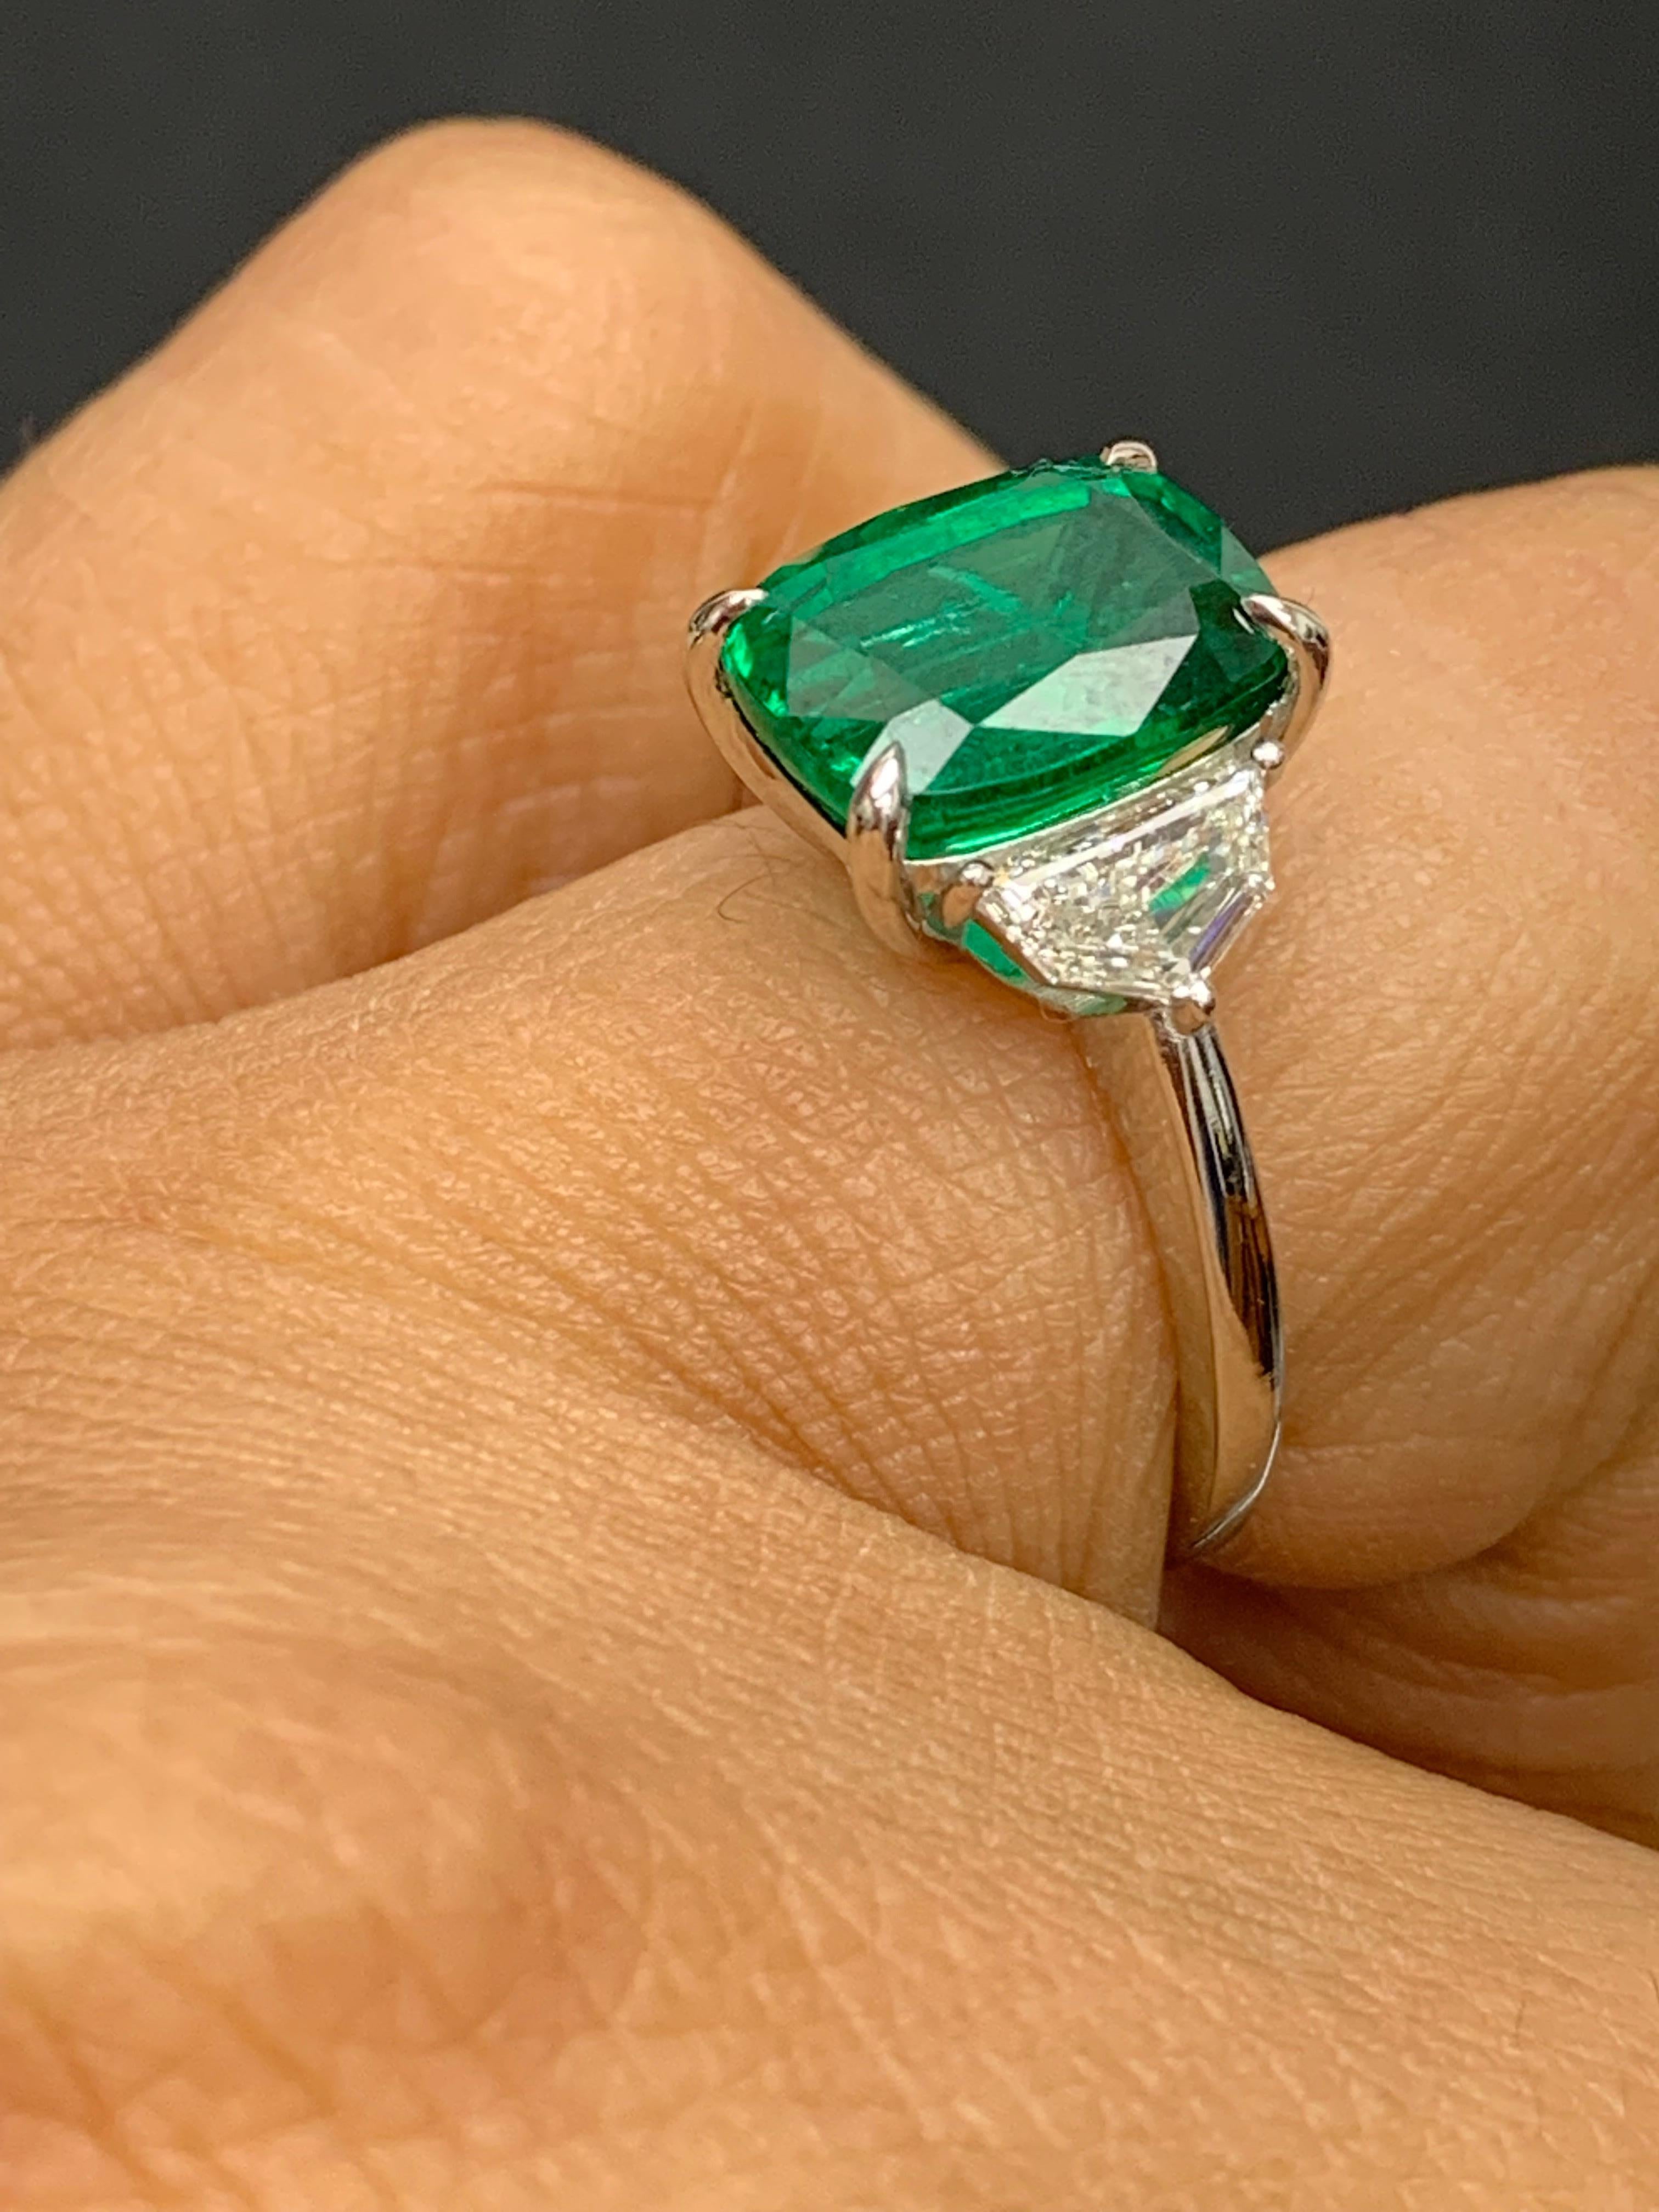 Women's Certified 3.49 Carat Cushion Cut Emerald & Diamond Engagement Ring in Platinum For Sale